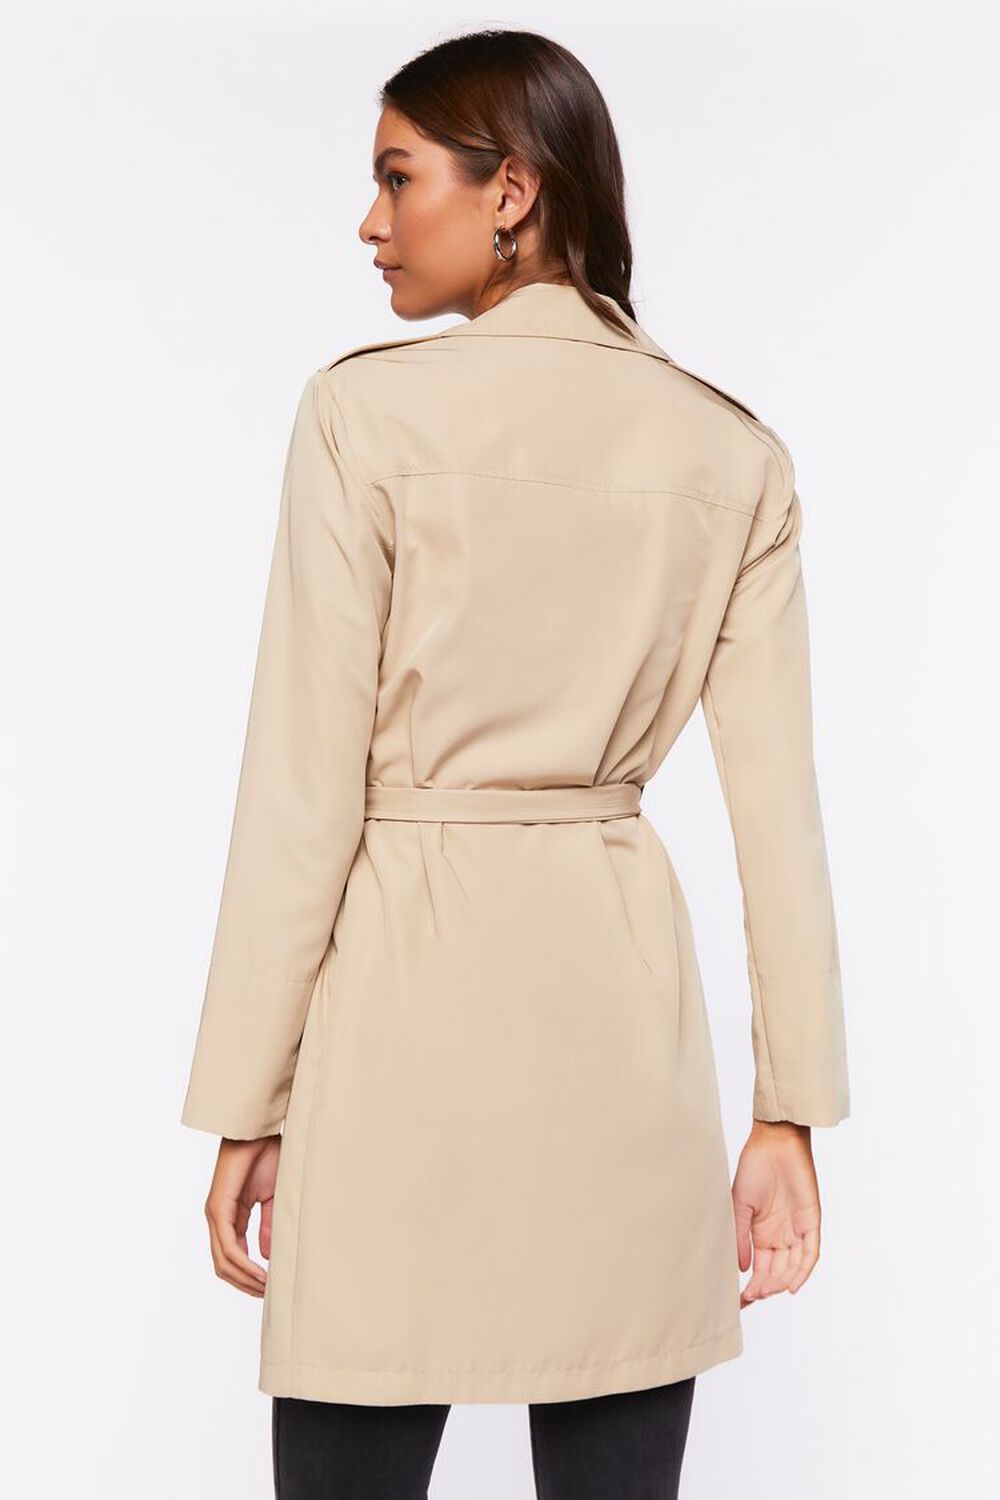 TAUPE Belted Trench Jacket, image 3